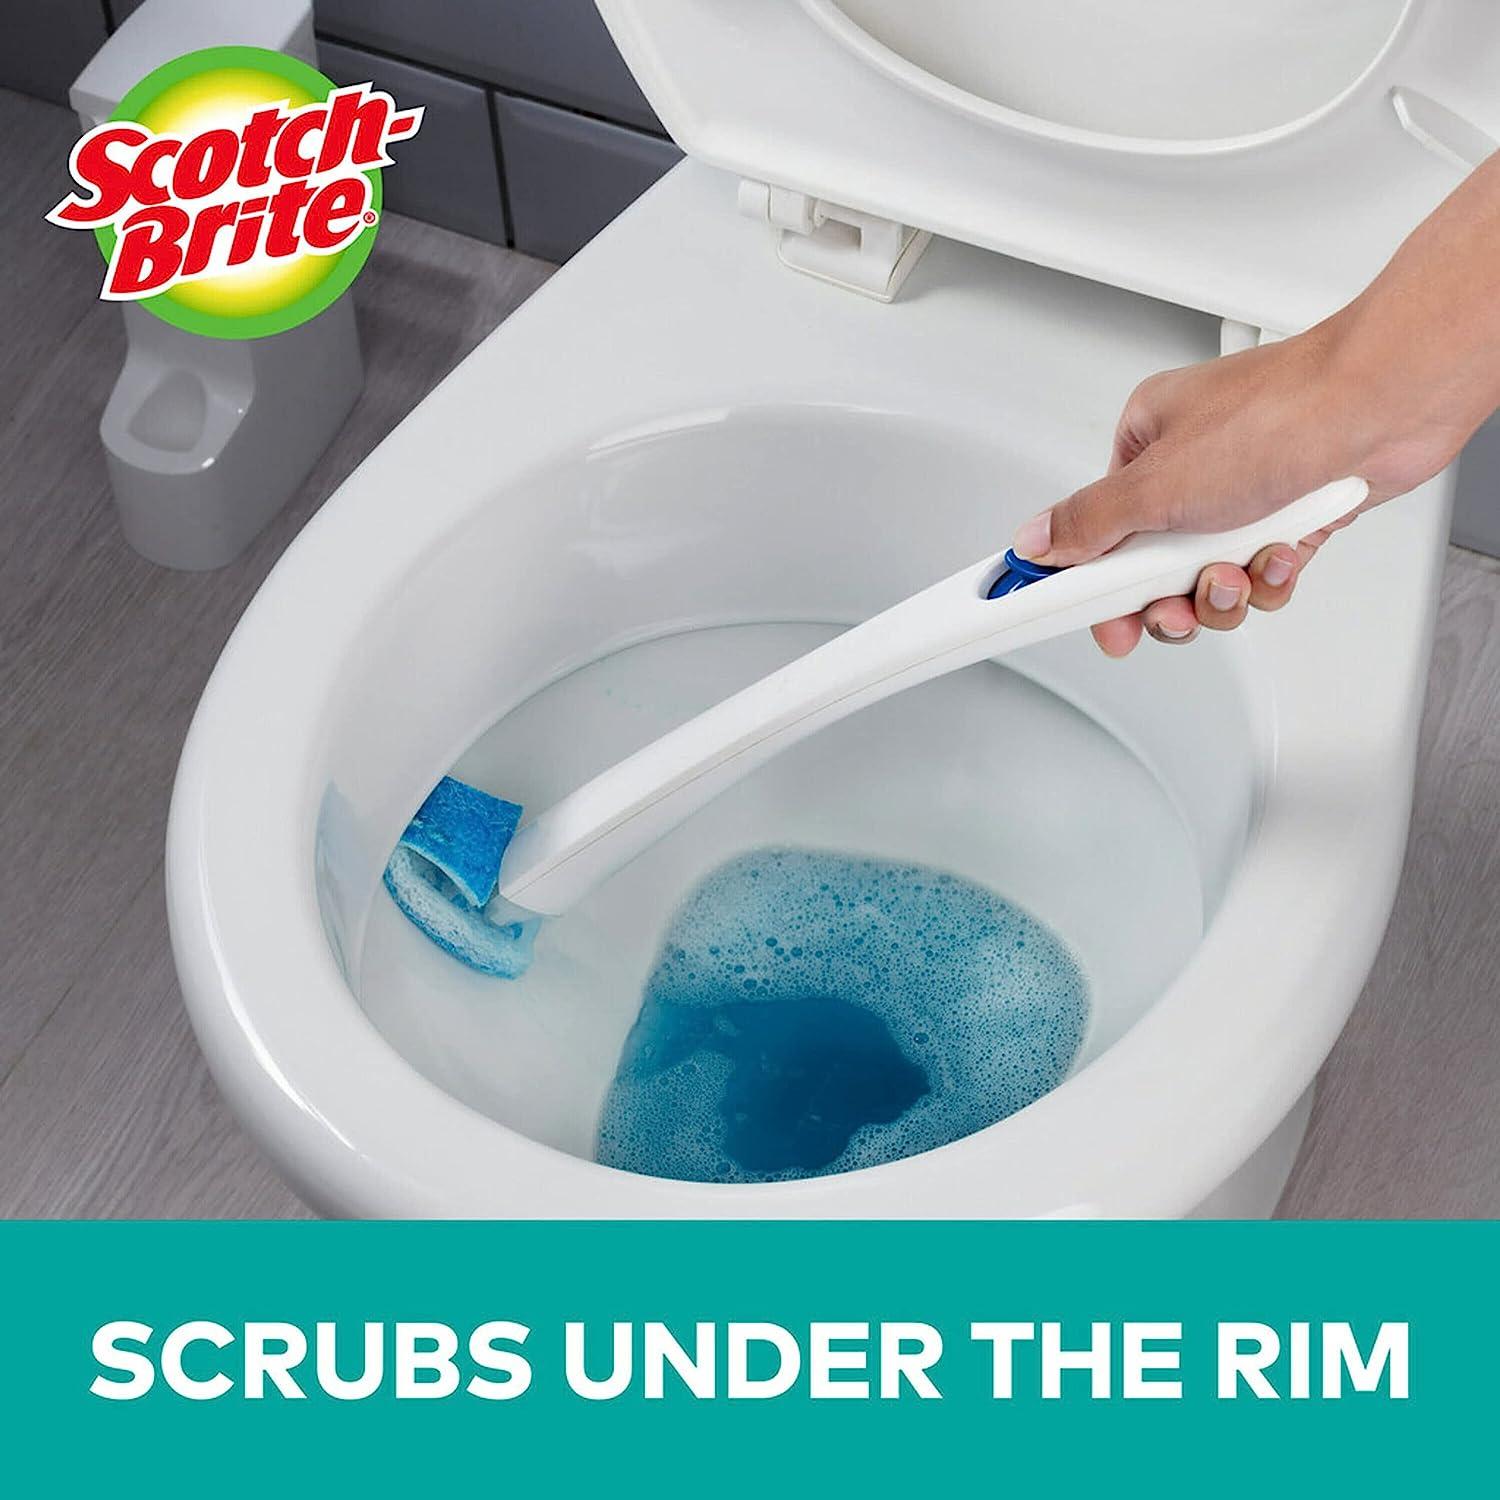 Scotch-Brite Power Scour Toilet Cleaning System Each